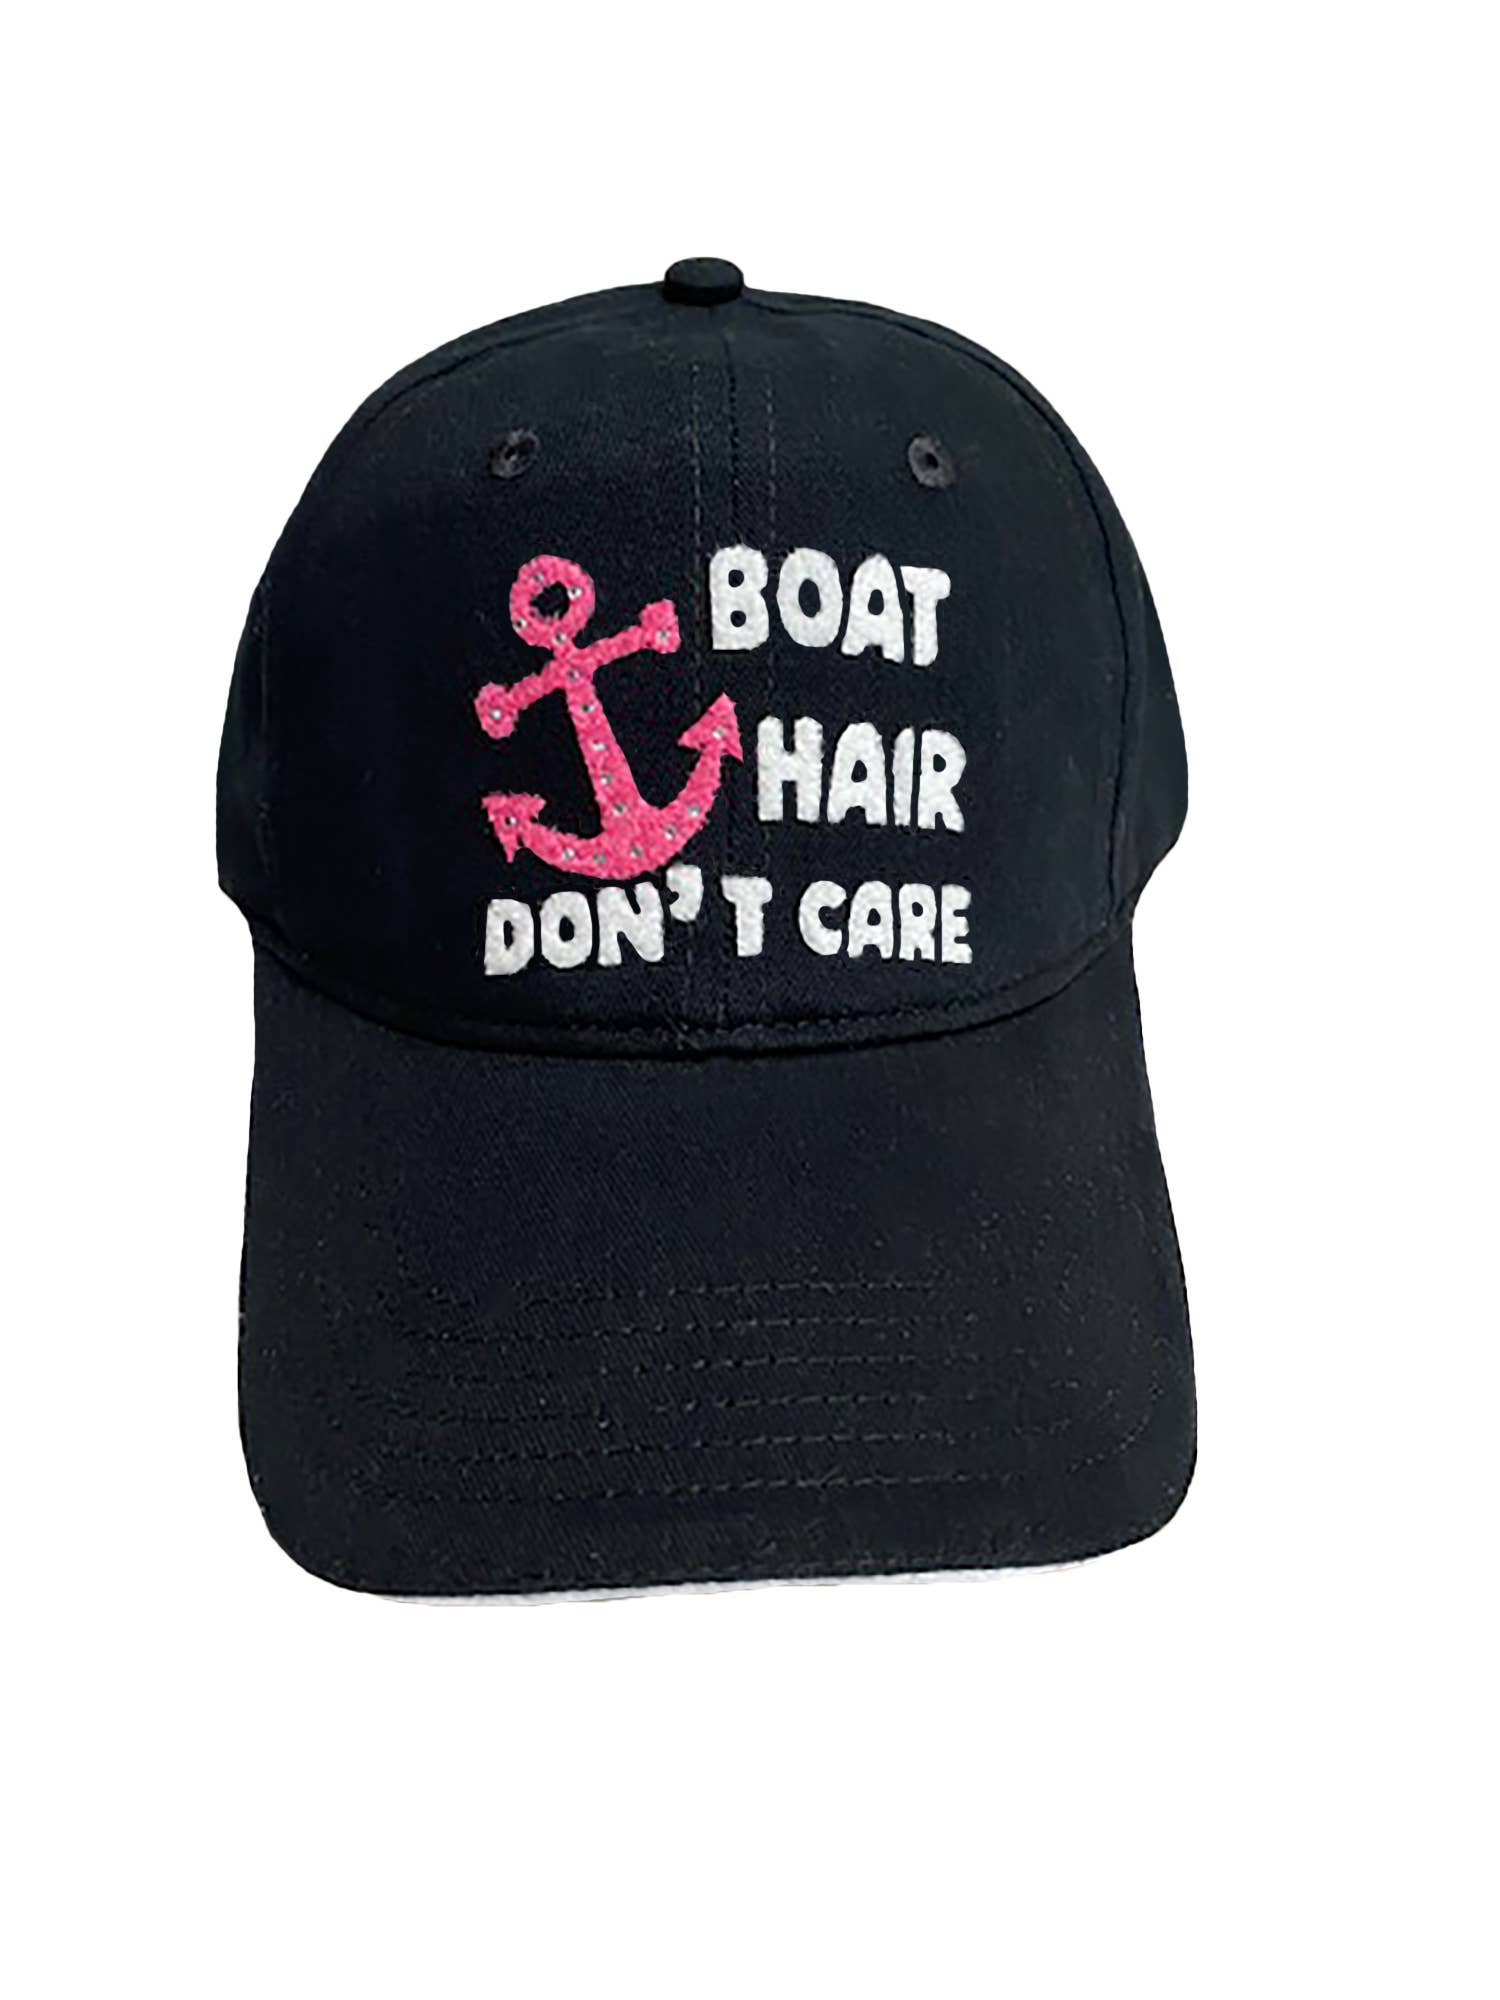 Boat Accessories for Women Men, Funny Boat Hair Don't Care Hat for Mom Dad,  Cotton